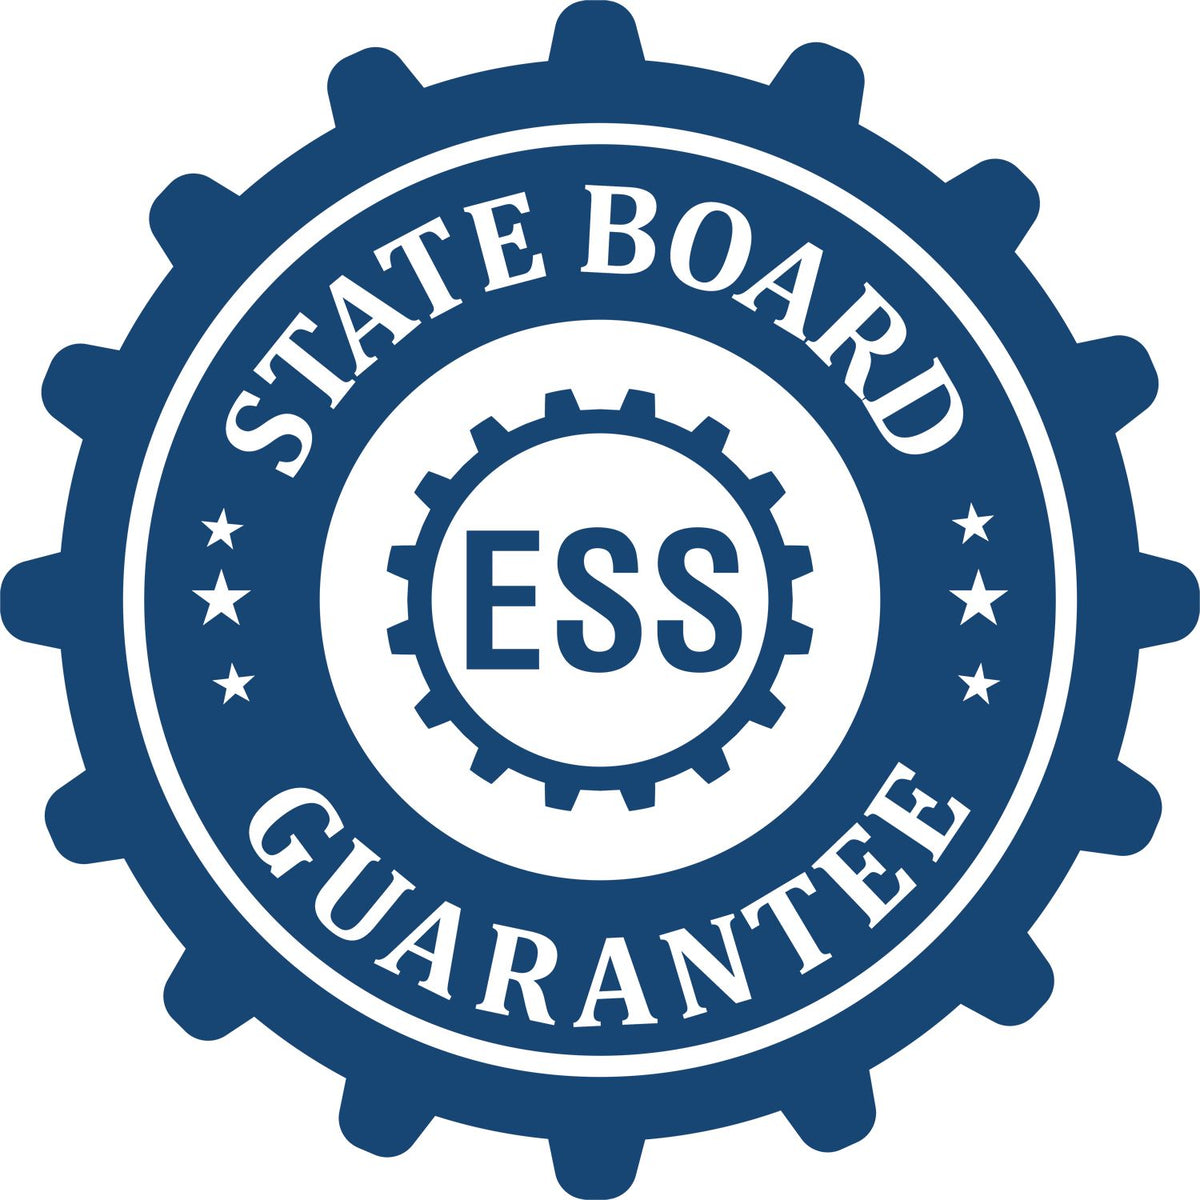 An emblem in a gear shape illustrating a state board guarantee for the Digital West Virginia PE Stamp and Electronic Seal for West Virginia Engineer product.